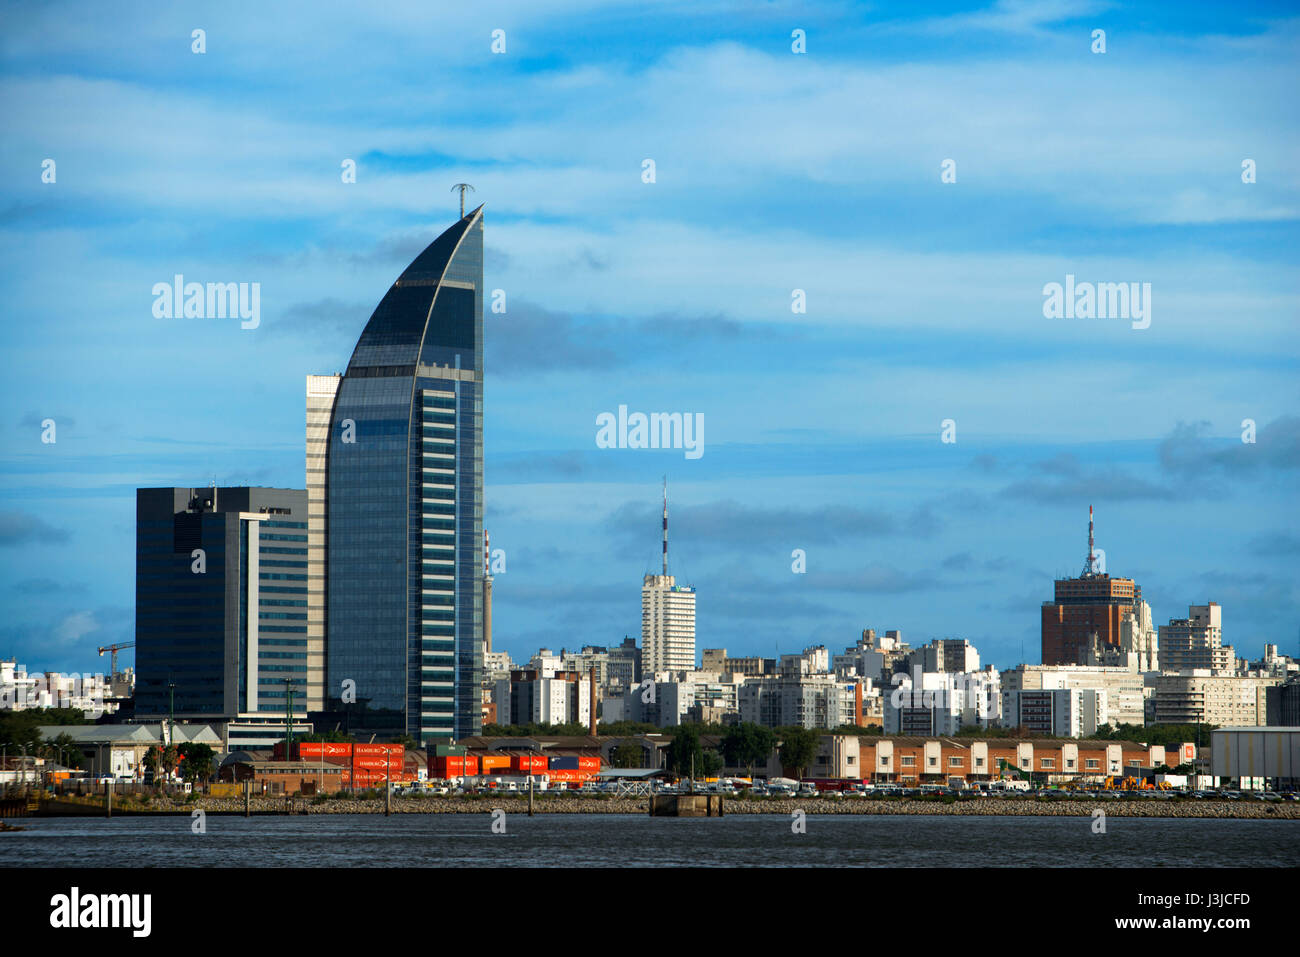 Montevideo waterfront and Telecommunications Tower or Antel Tower is a 157 meter tall building in Montevideo, Uruguay Stock Photo